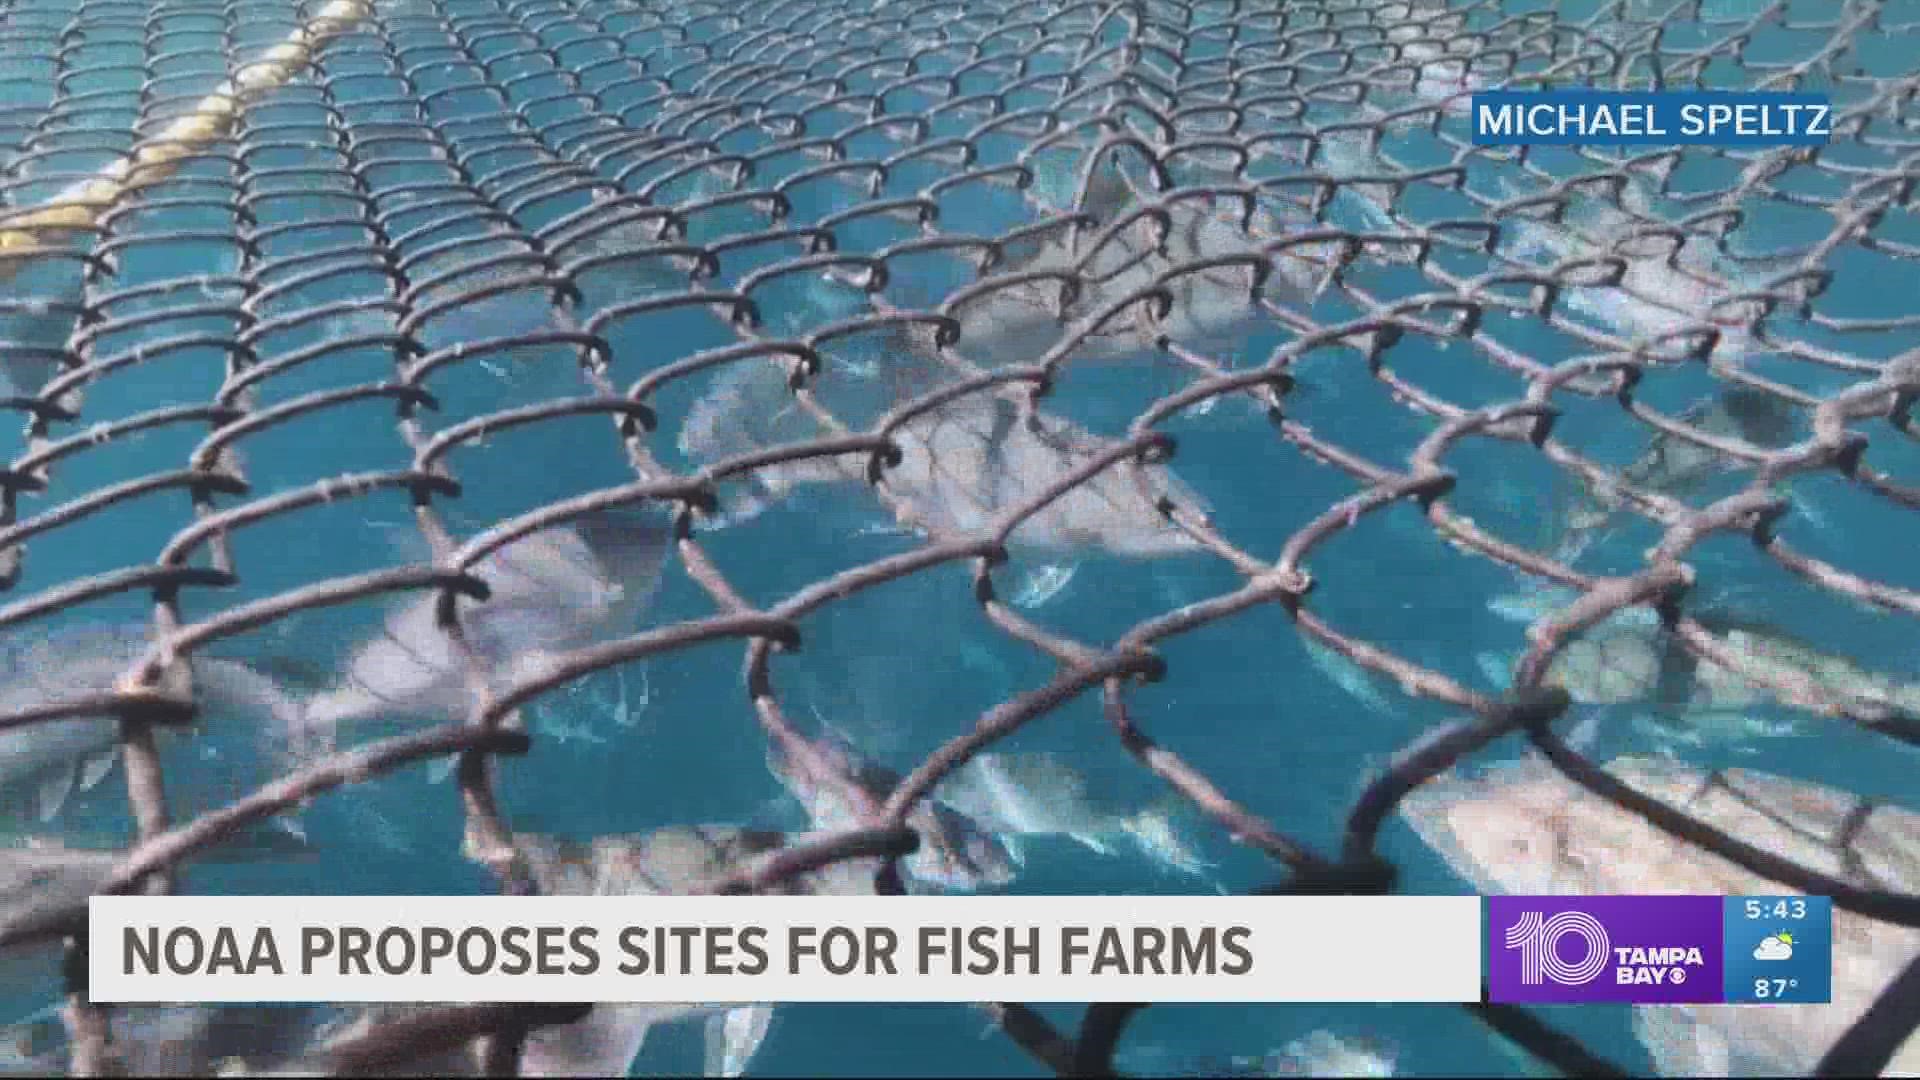 The EPA is revising the language for a fish farm permit near Venice, but there are other sites that could potentially turn into new fish farms in the Gulf of Mexico.